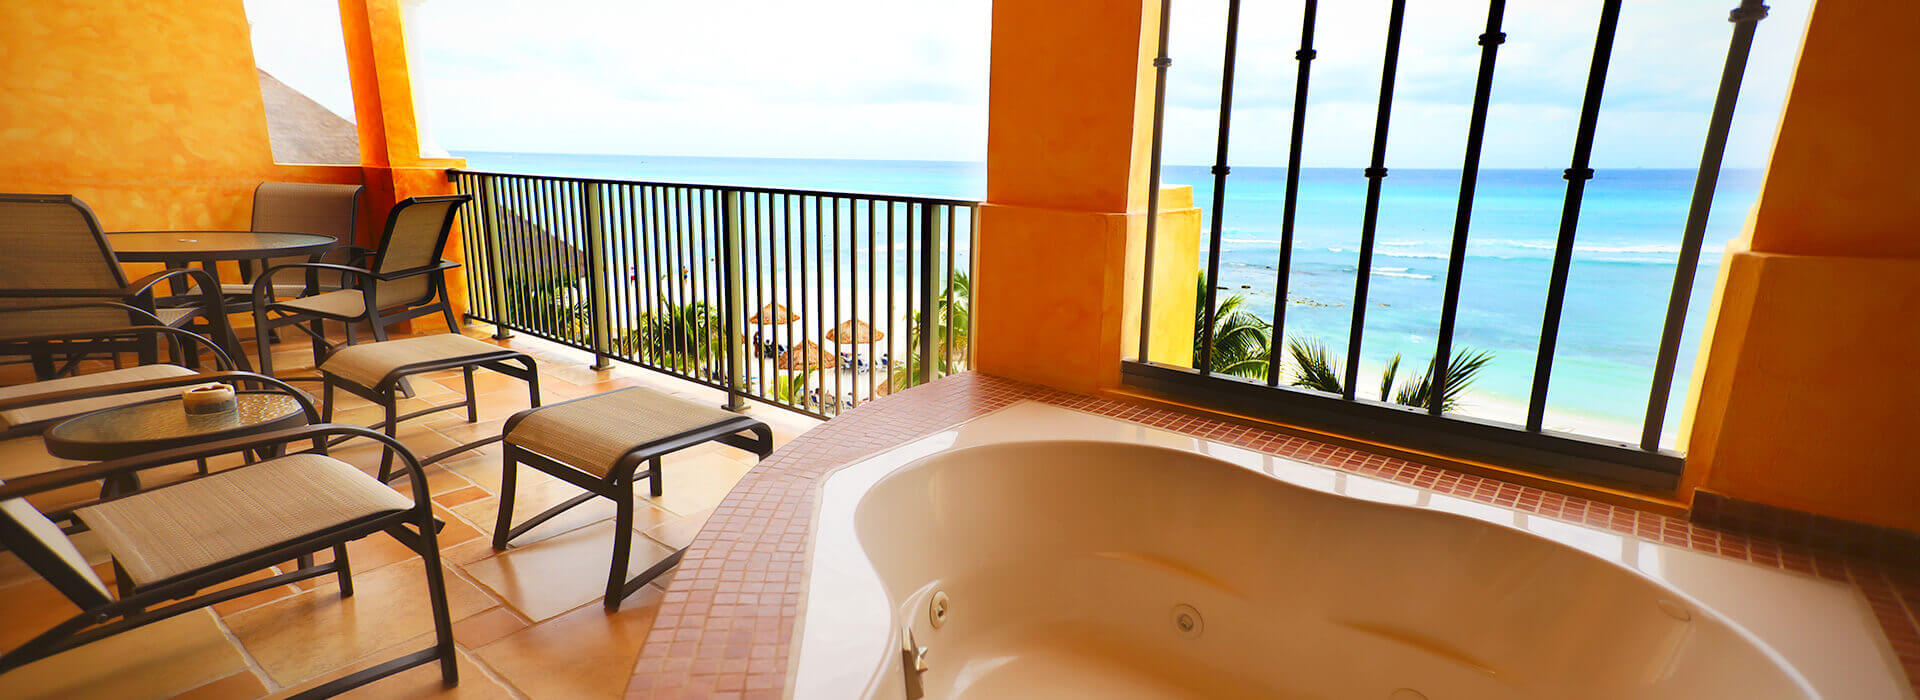 beachfront suite with terrace and jacuzzi